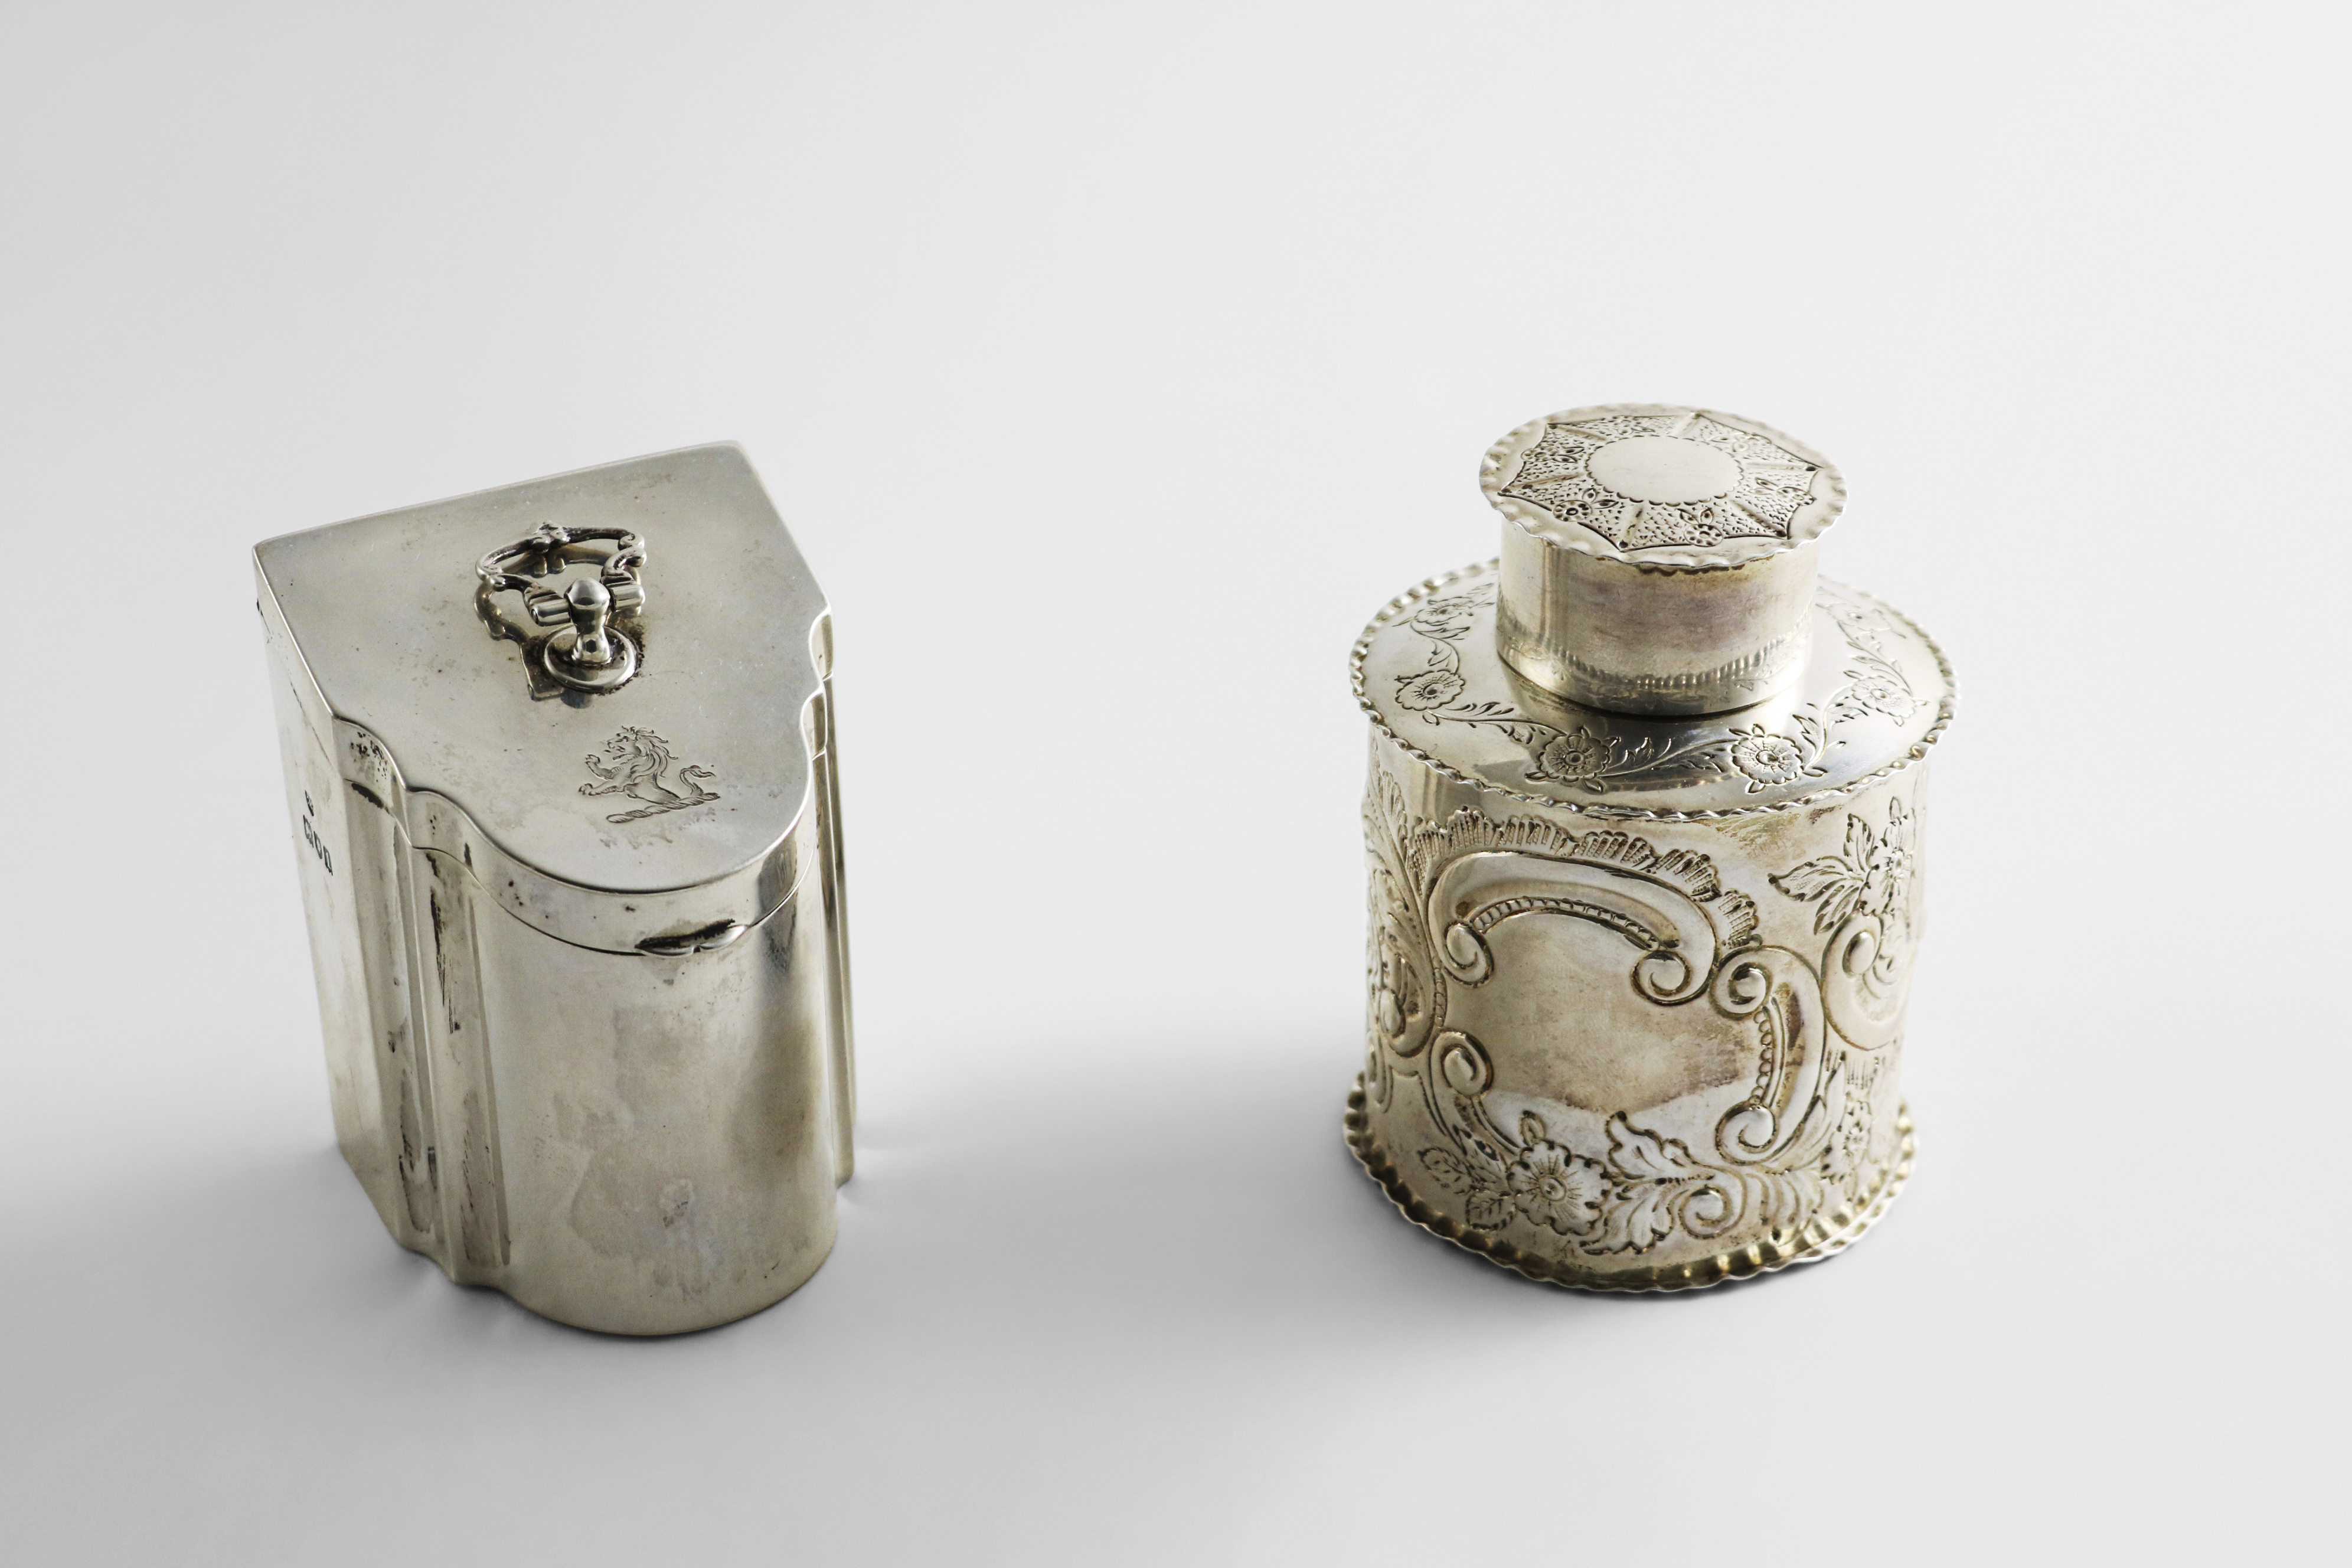 AN EDWARDIAN SILVER NOVELTY BOX resembling a George III canteen box with a swing finial and